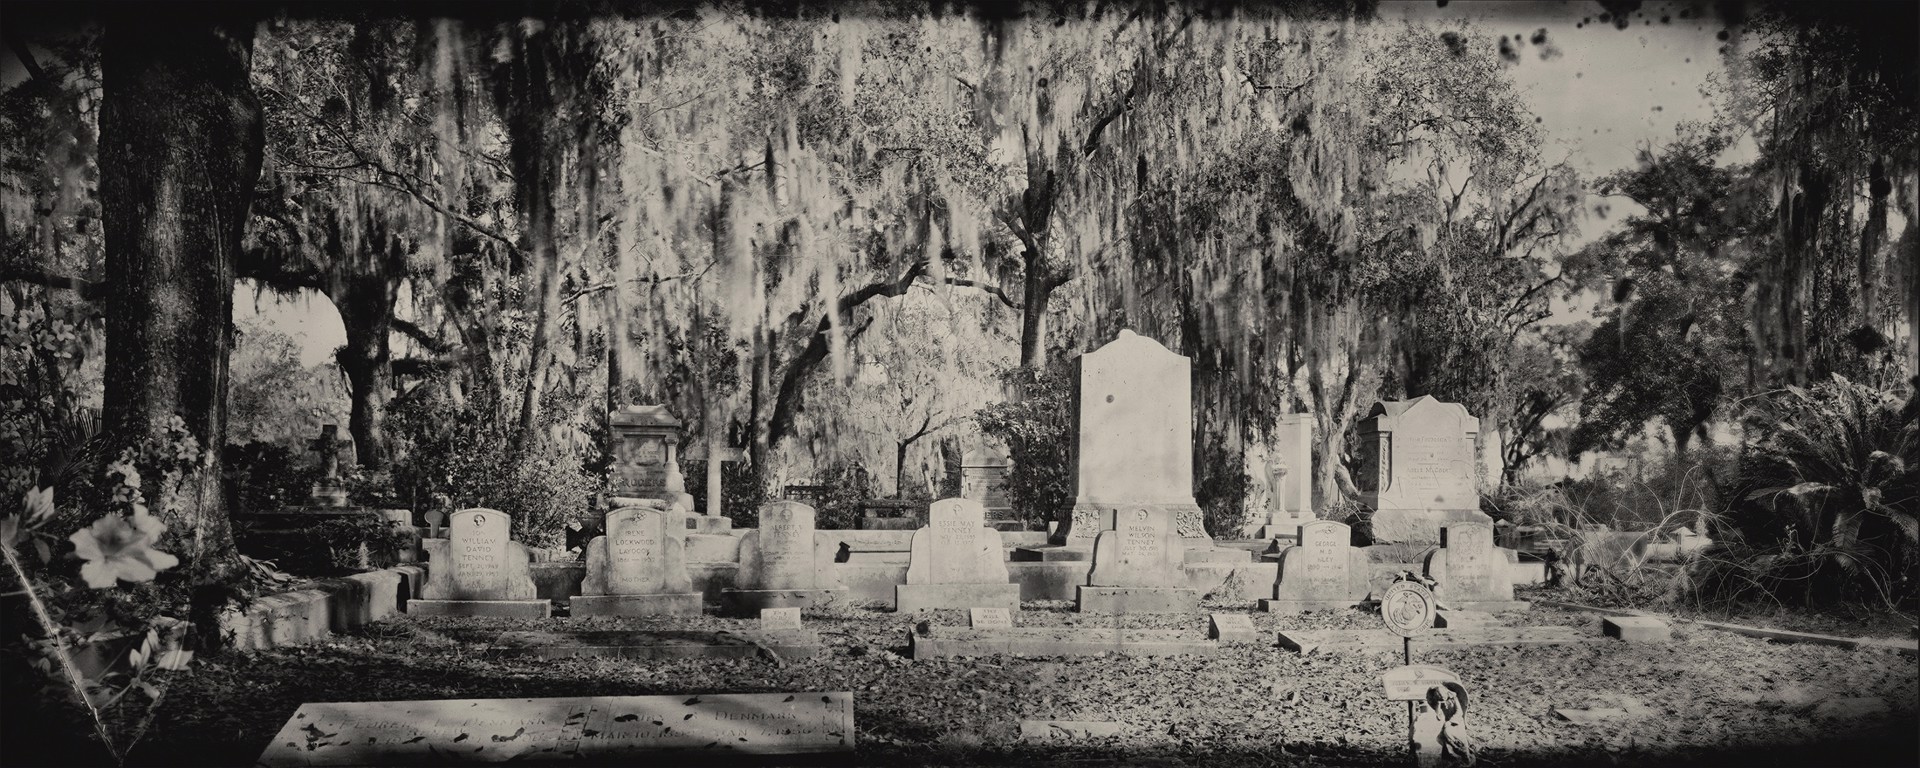 A Study of the Fragility of Life #9, Bonaventure Cemetery by Richard Austin